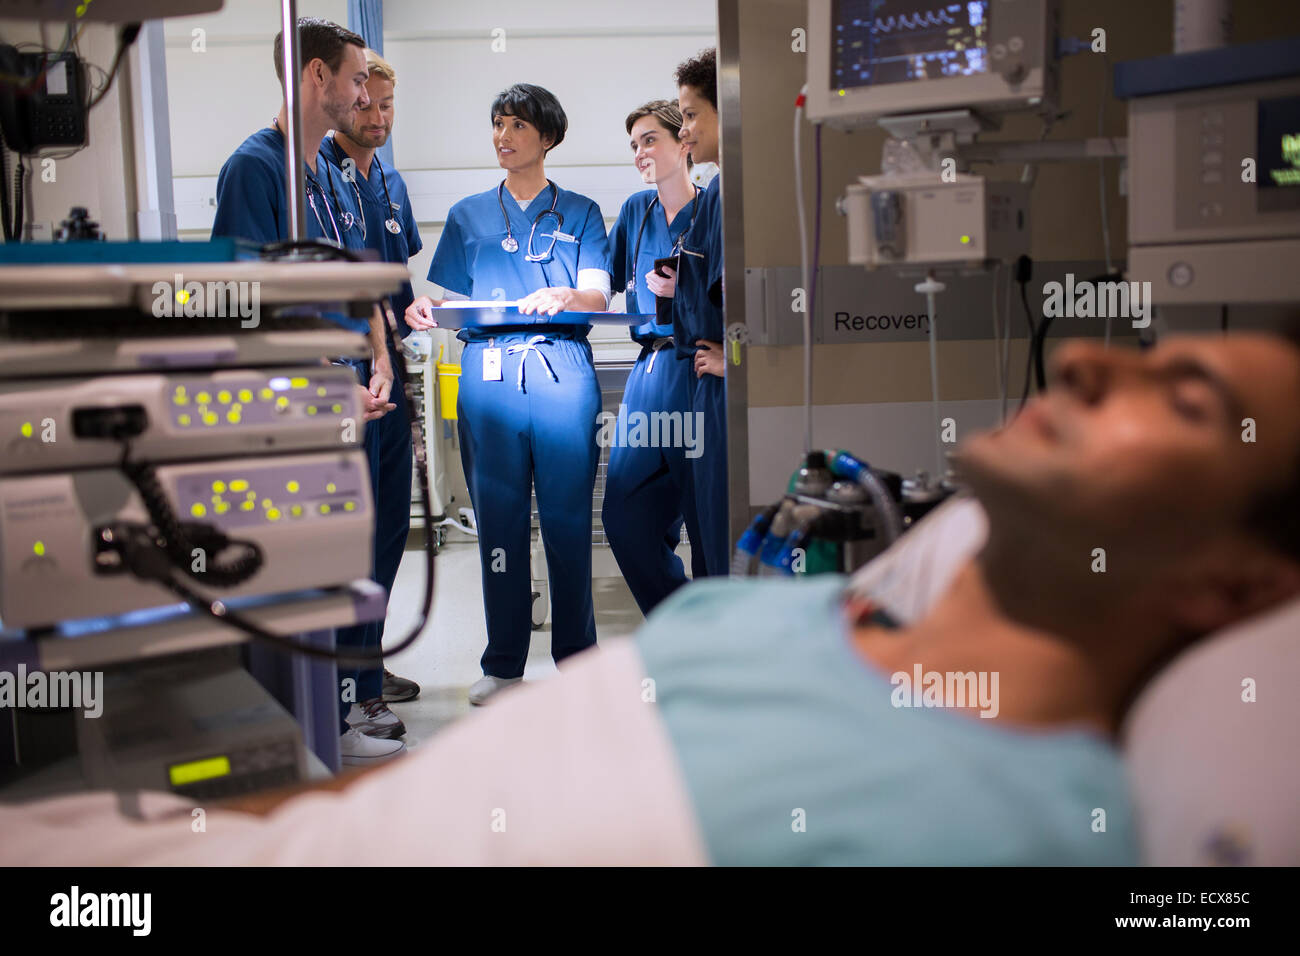 Patient attached to medical monitoring equipment in intensive care unit, doctors standing in doorway Stock Photo